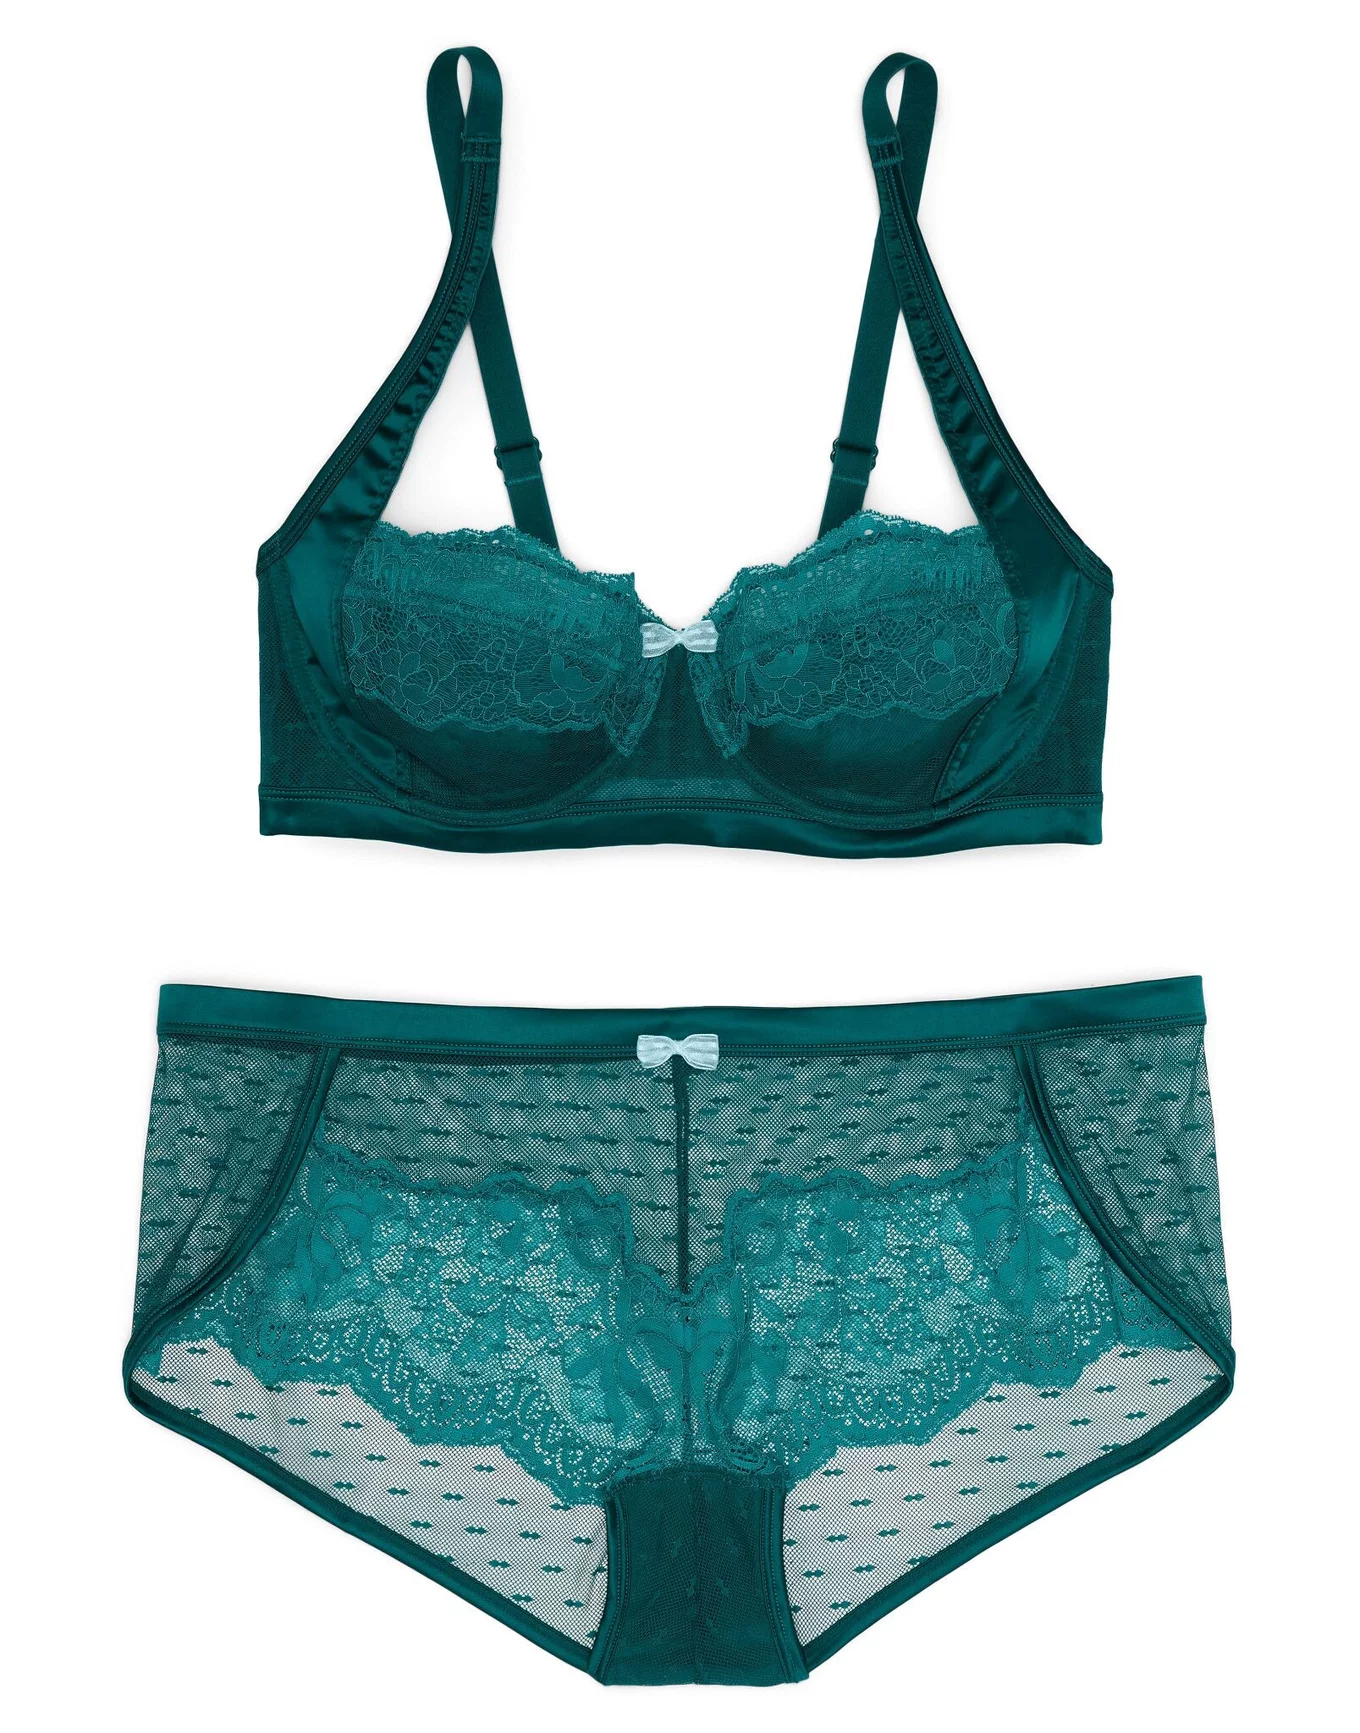 Teal lace & plum soft bra – The Pantry Underwear